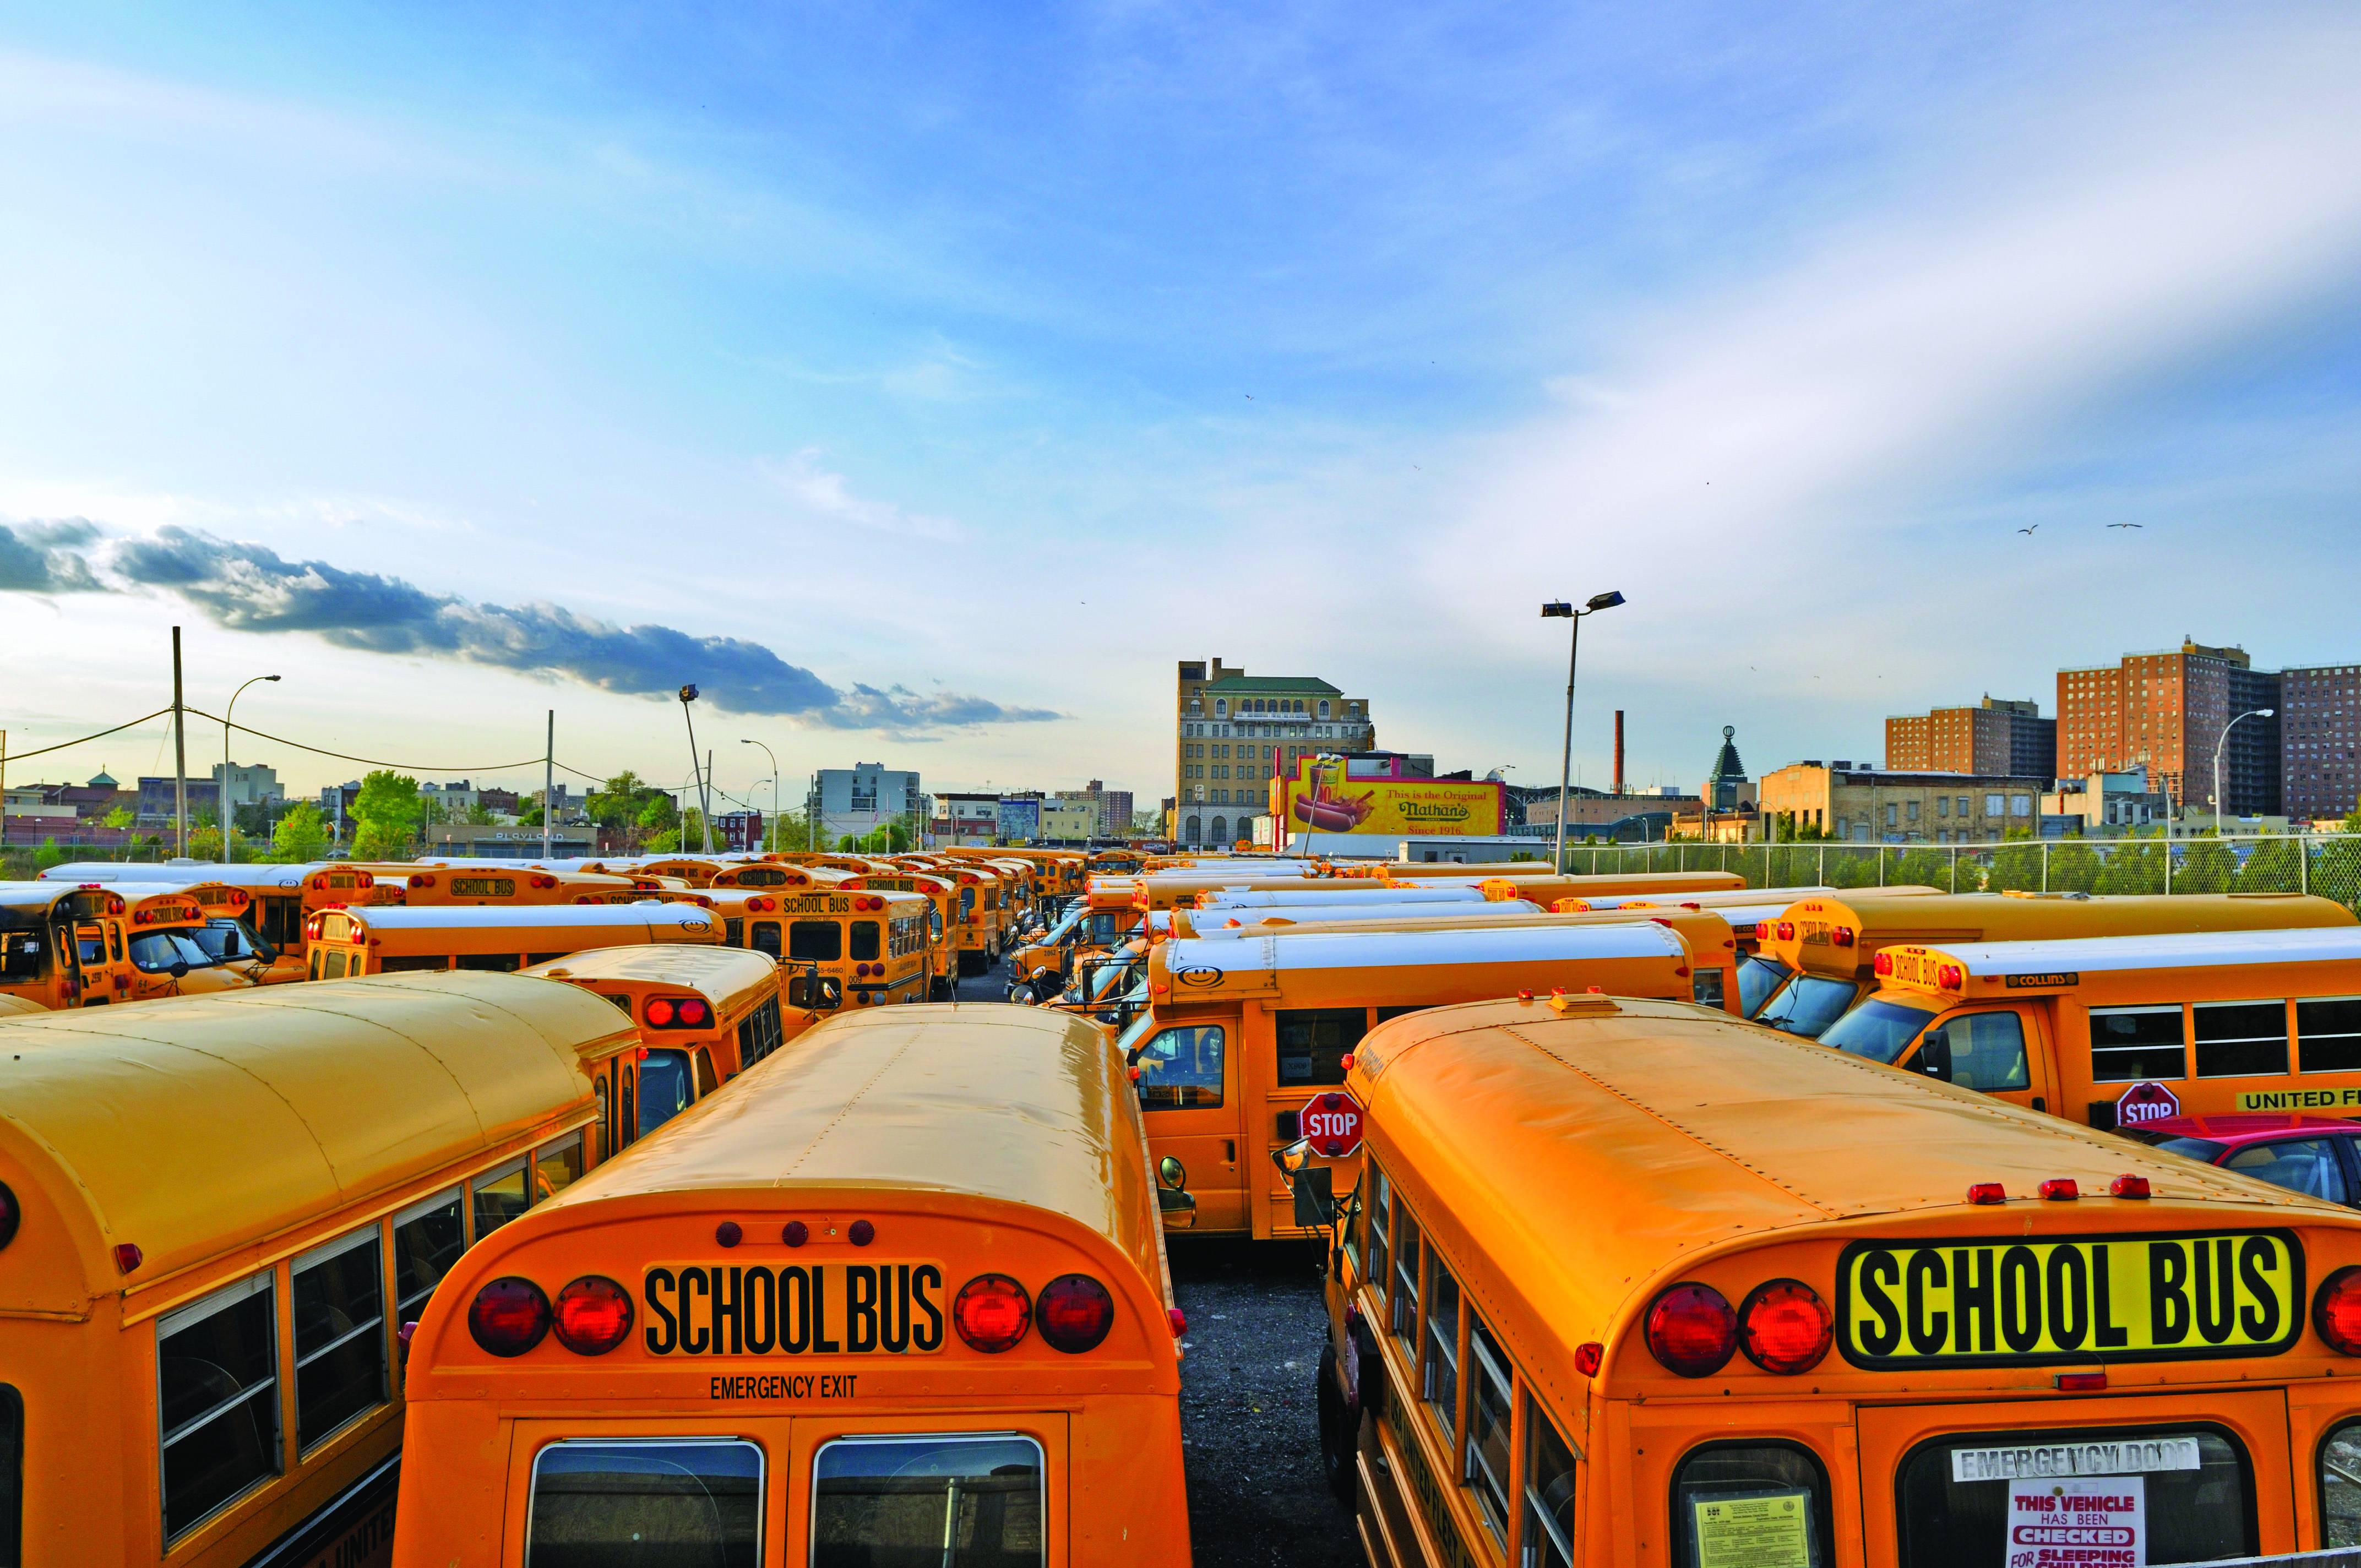 Video Cameras on School Buses: One More Step to Student Safety